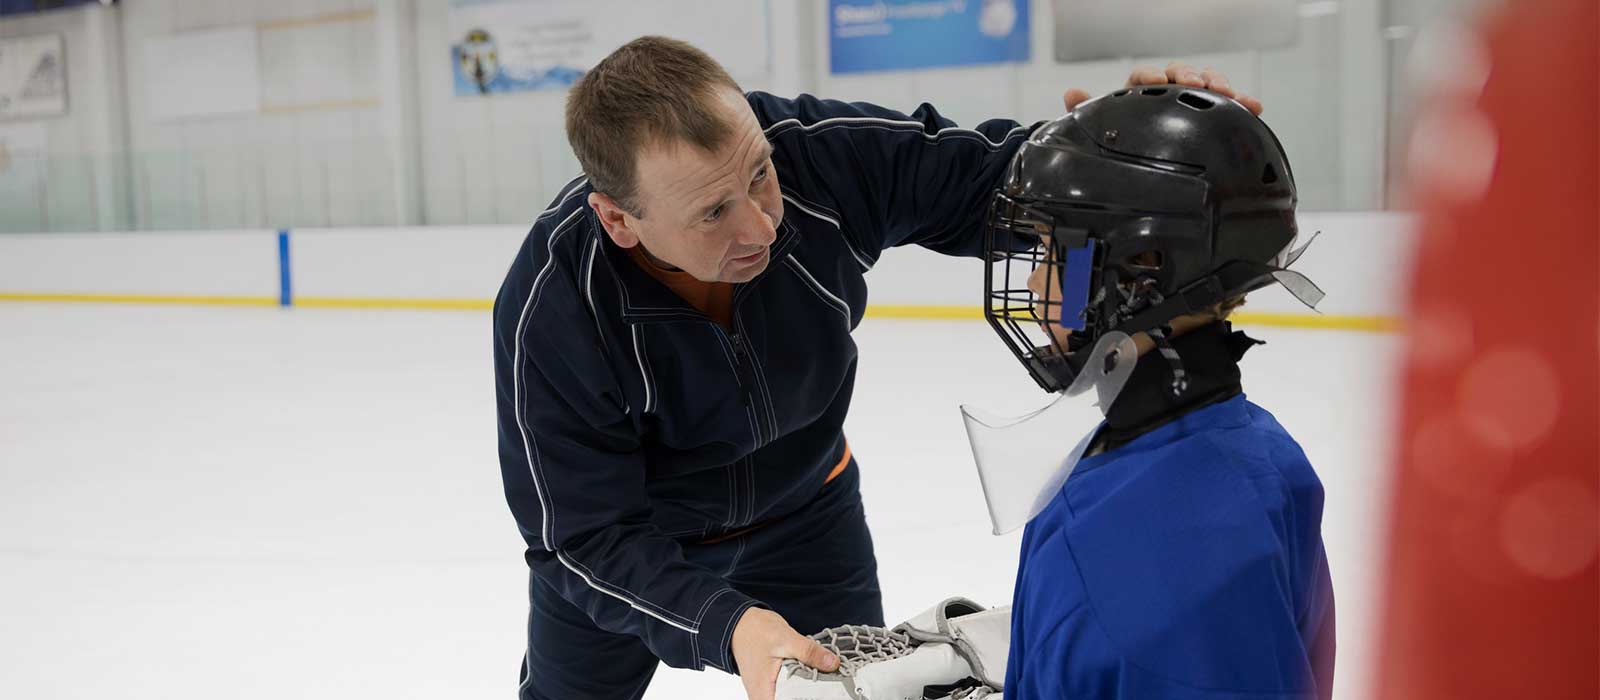 Coach evaluating youth hockey player